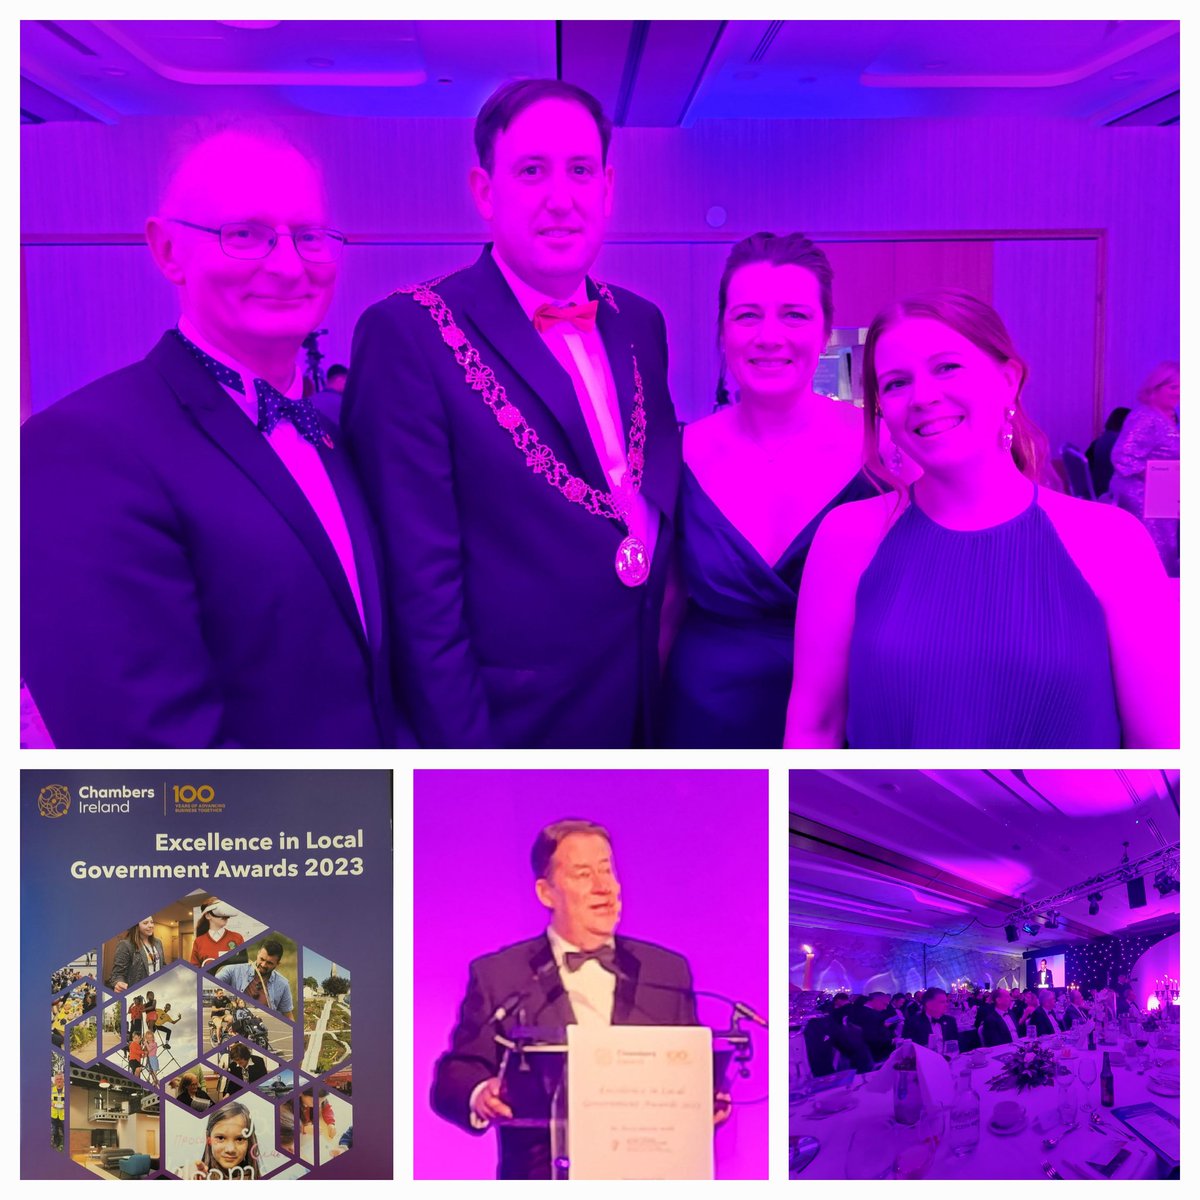 Congratulations to all the award winners @ChambersIreland #ELGAwards23 sponsored by @Orsted. As a judge for several of the categories this year, I was truly impressed by all the great initiatives driven by local authorities throughout the country, supporting their communities